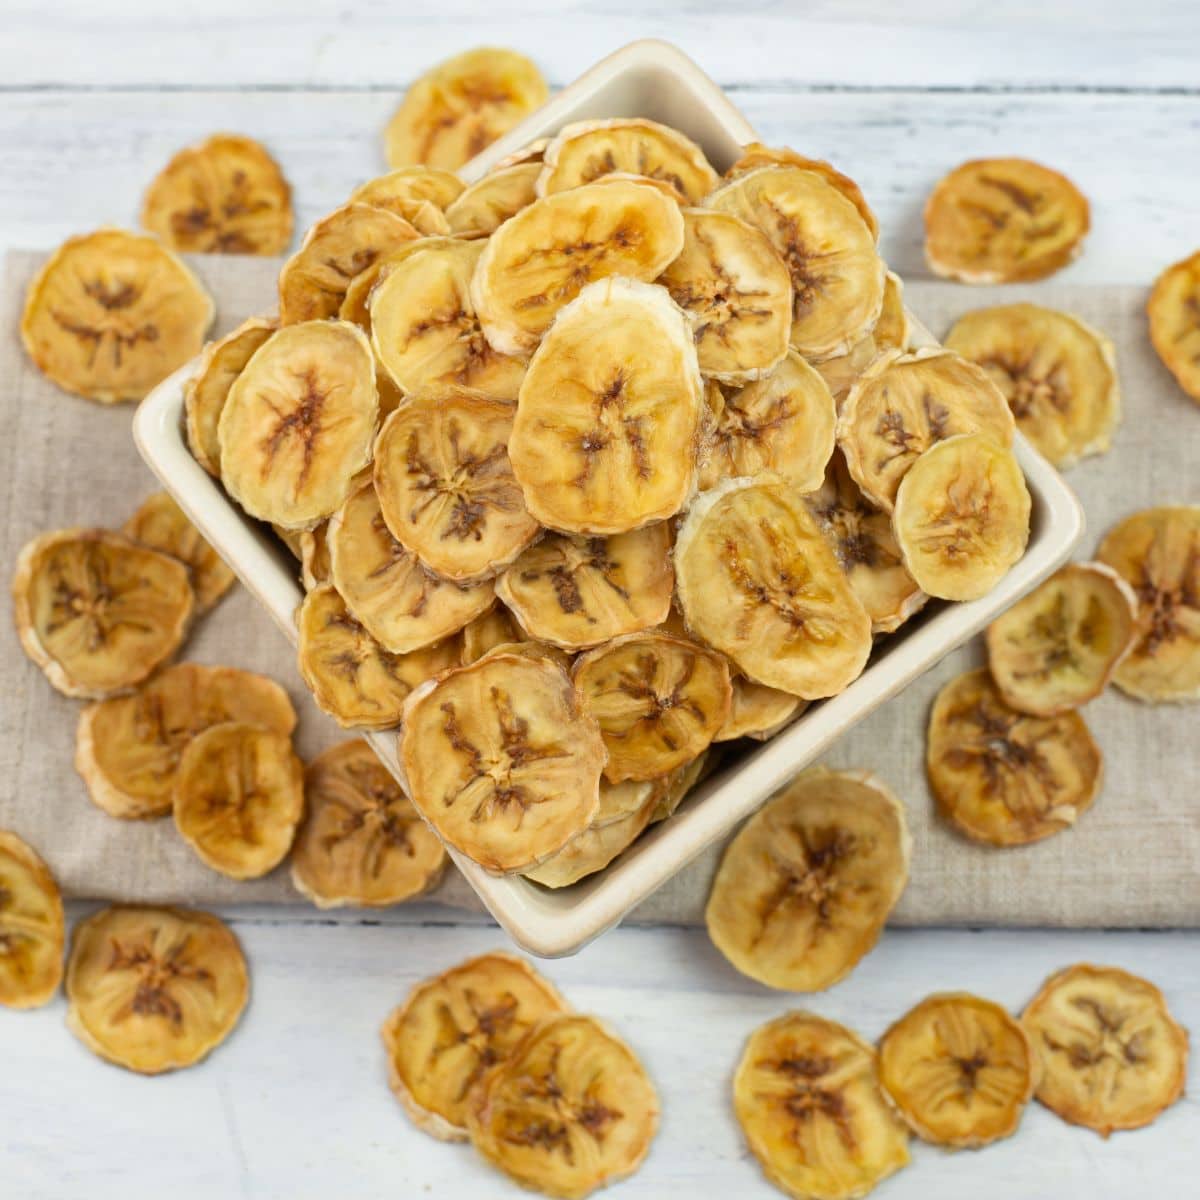 Dried banana chips in a square bowl.